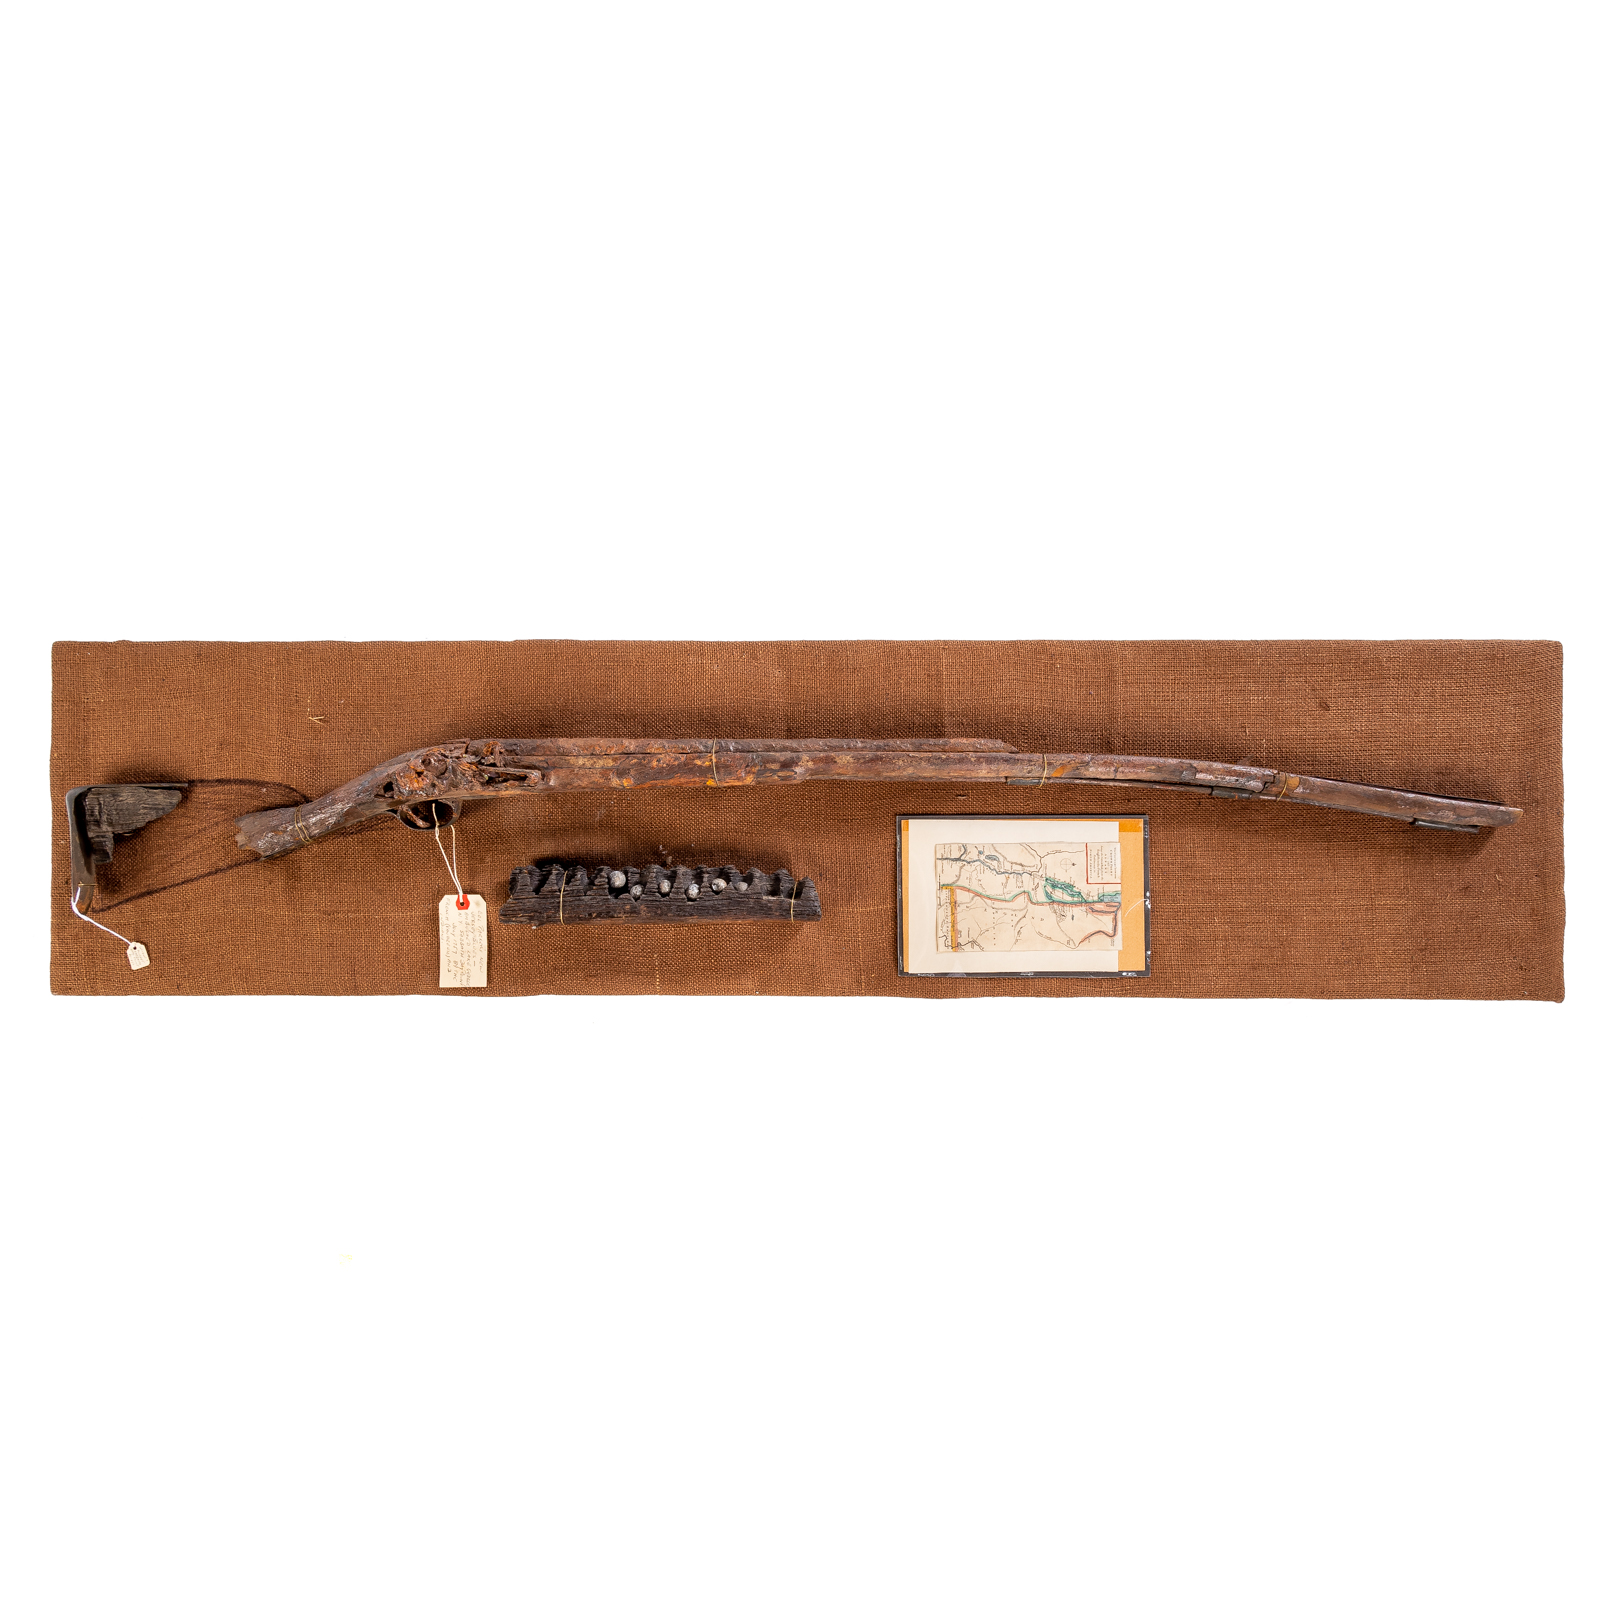 WILSON FUSIL MUSKET RELIC FROM